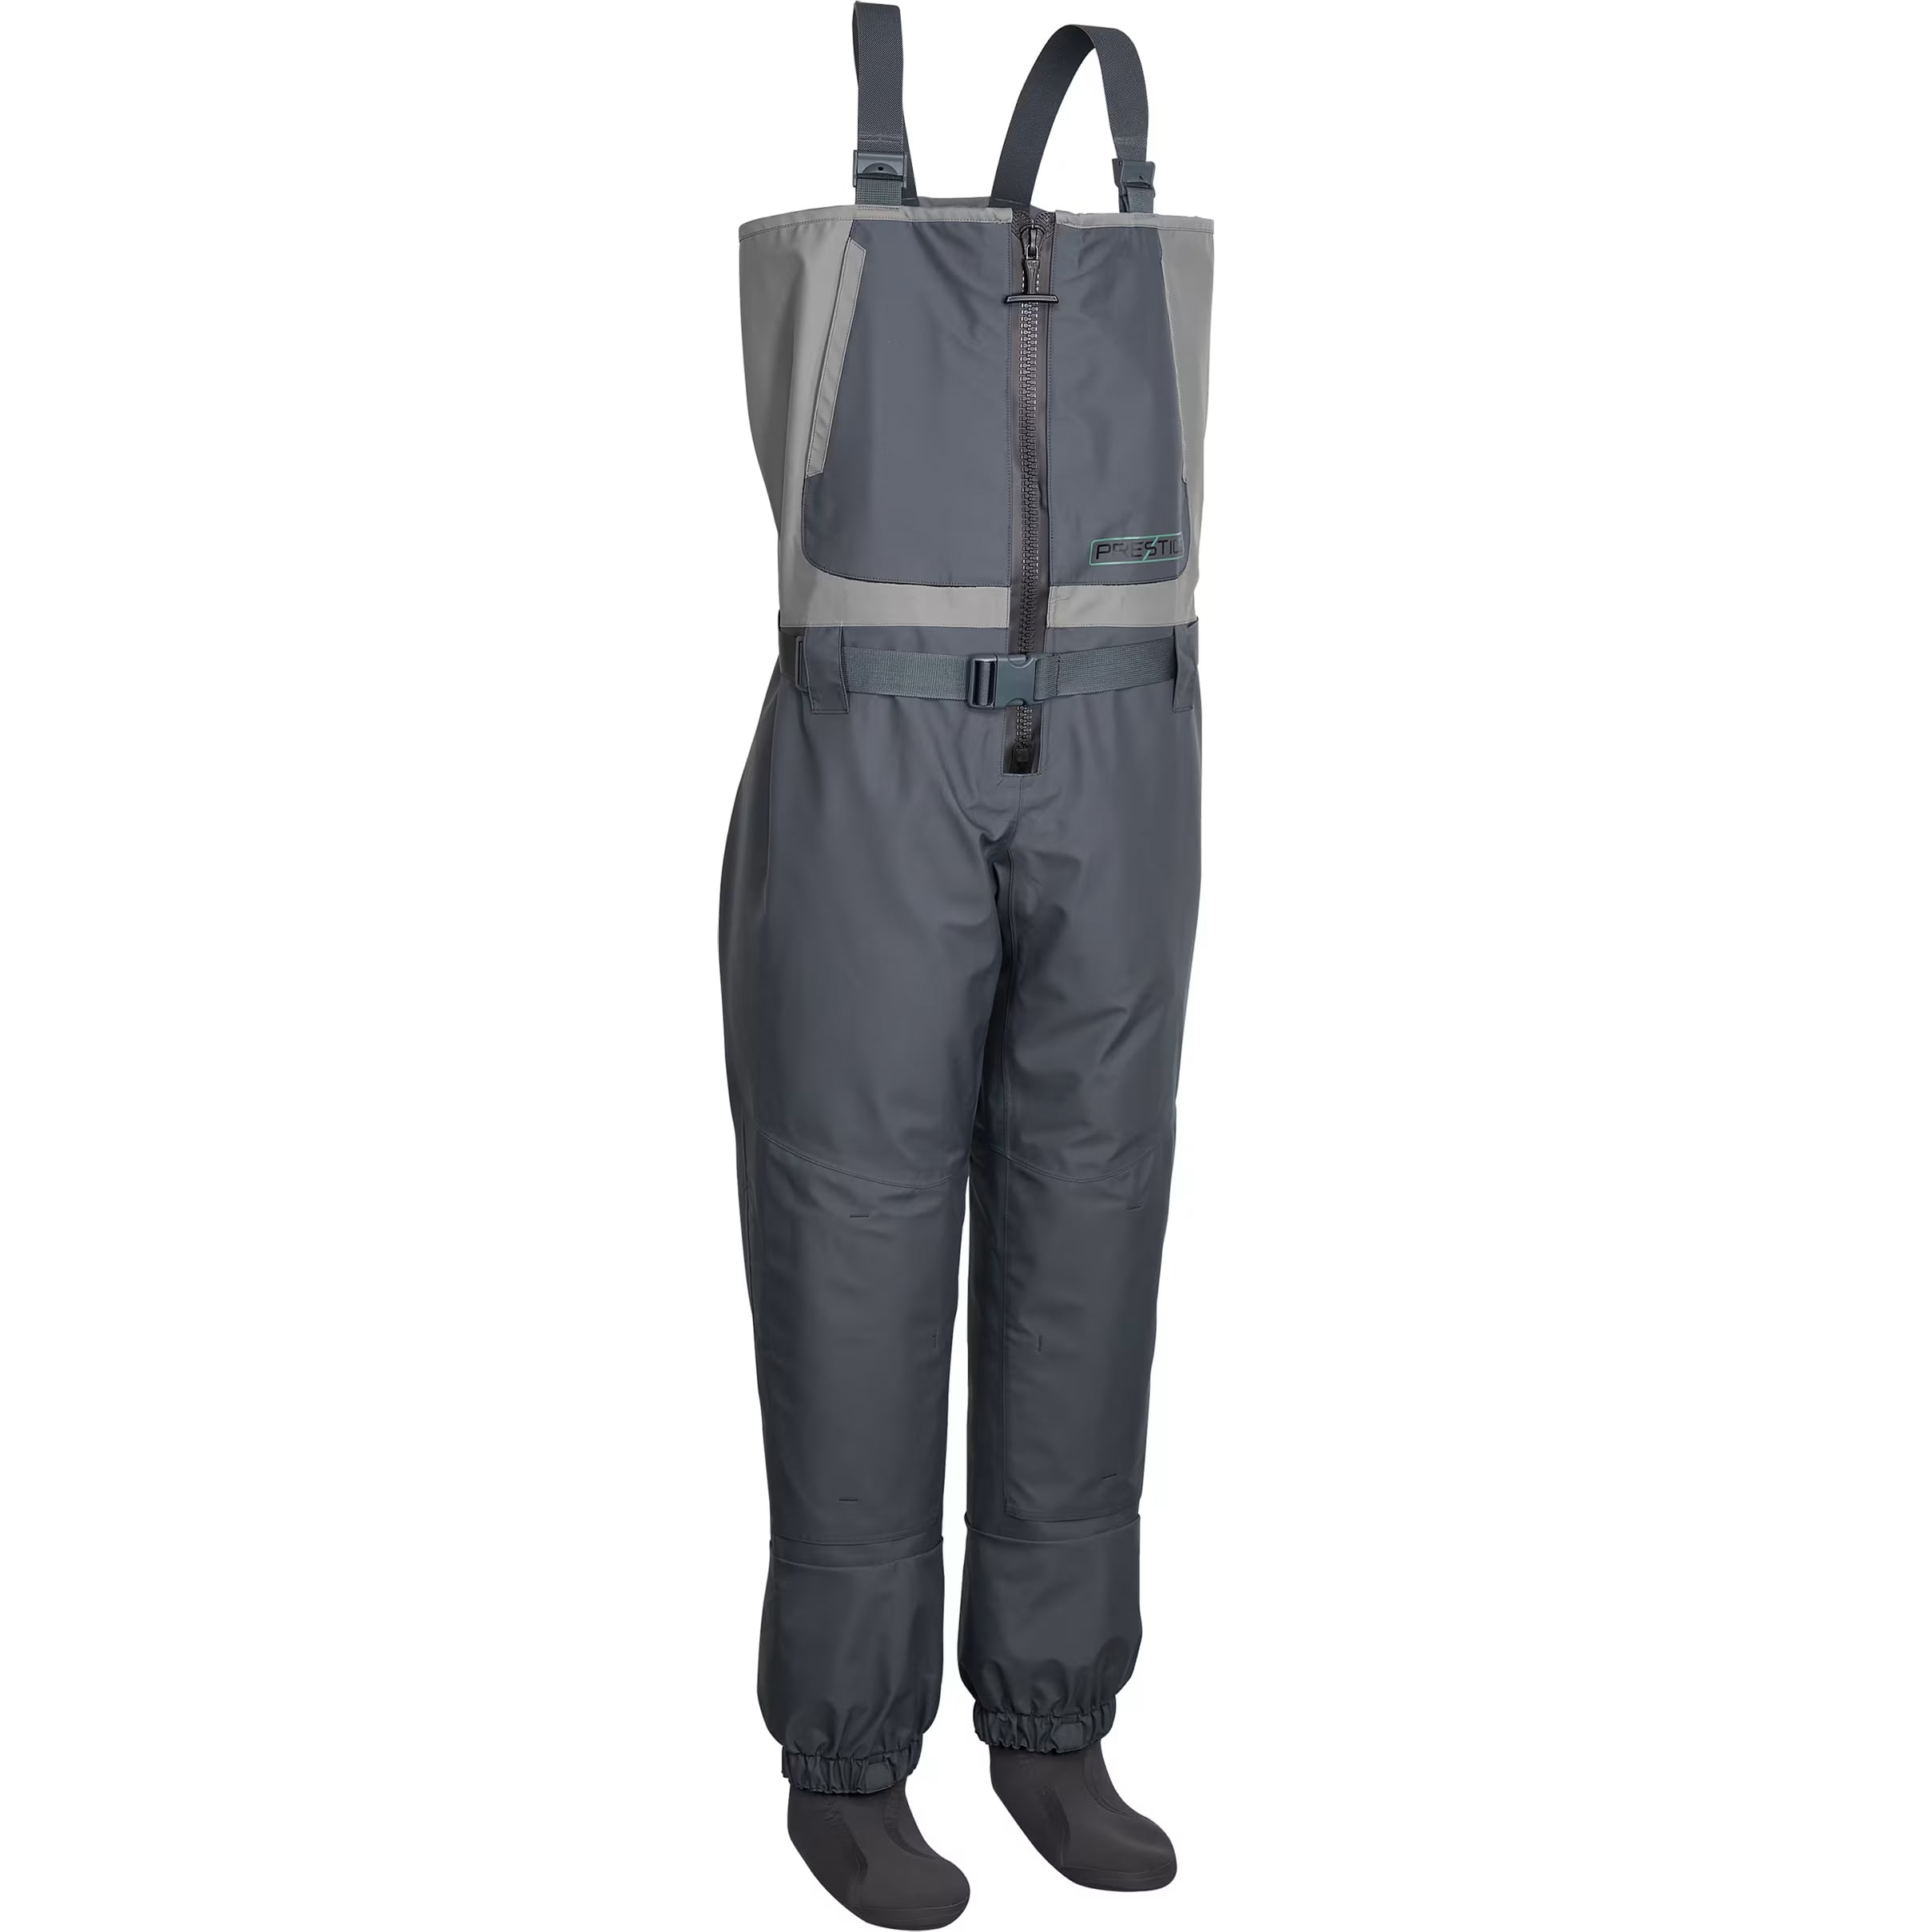 White River Fly Shop® Men’s Prestige Front Zip Stocking-Foot Chest Waders